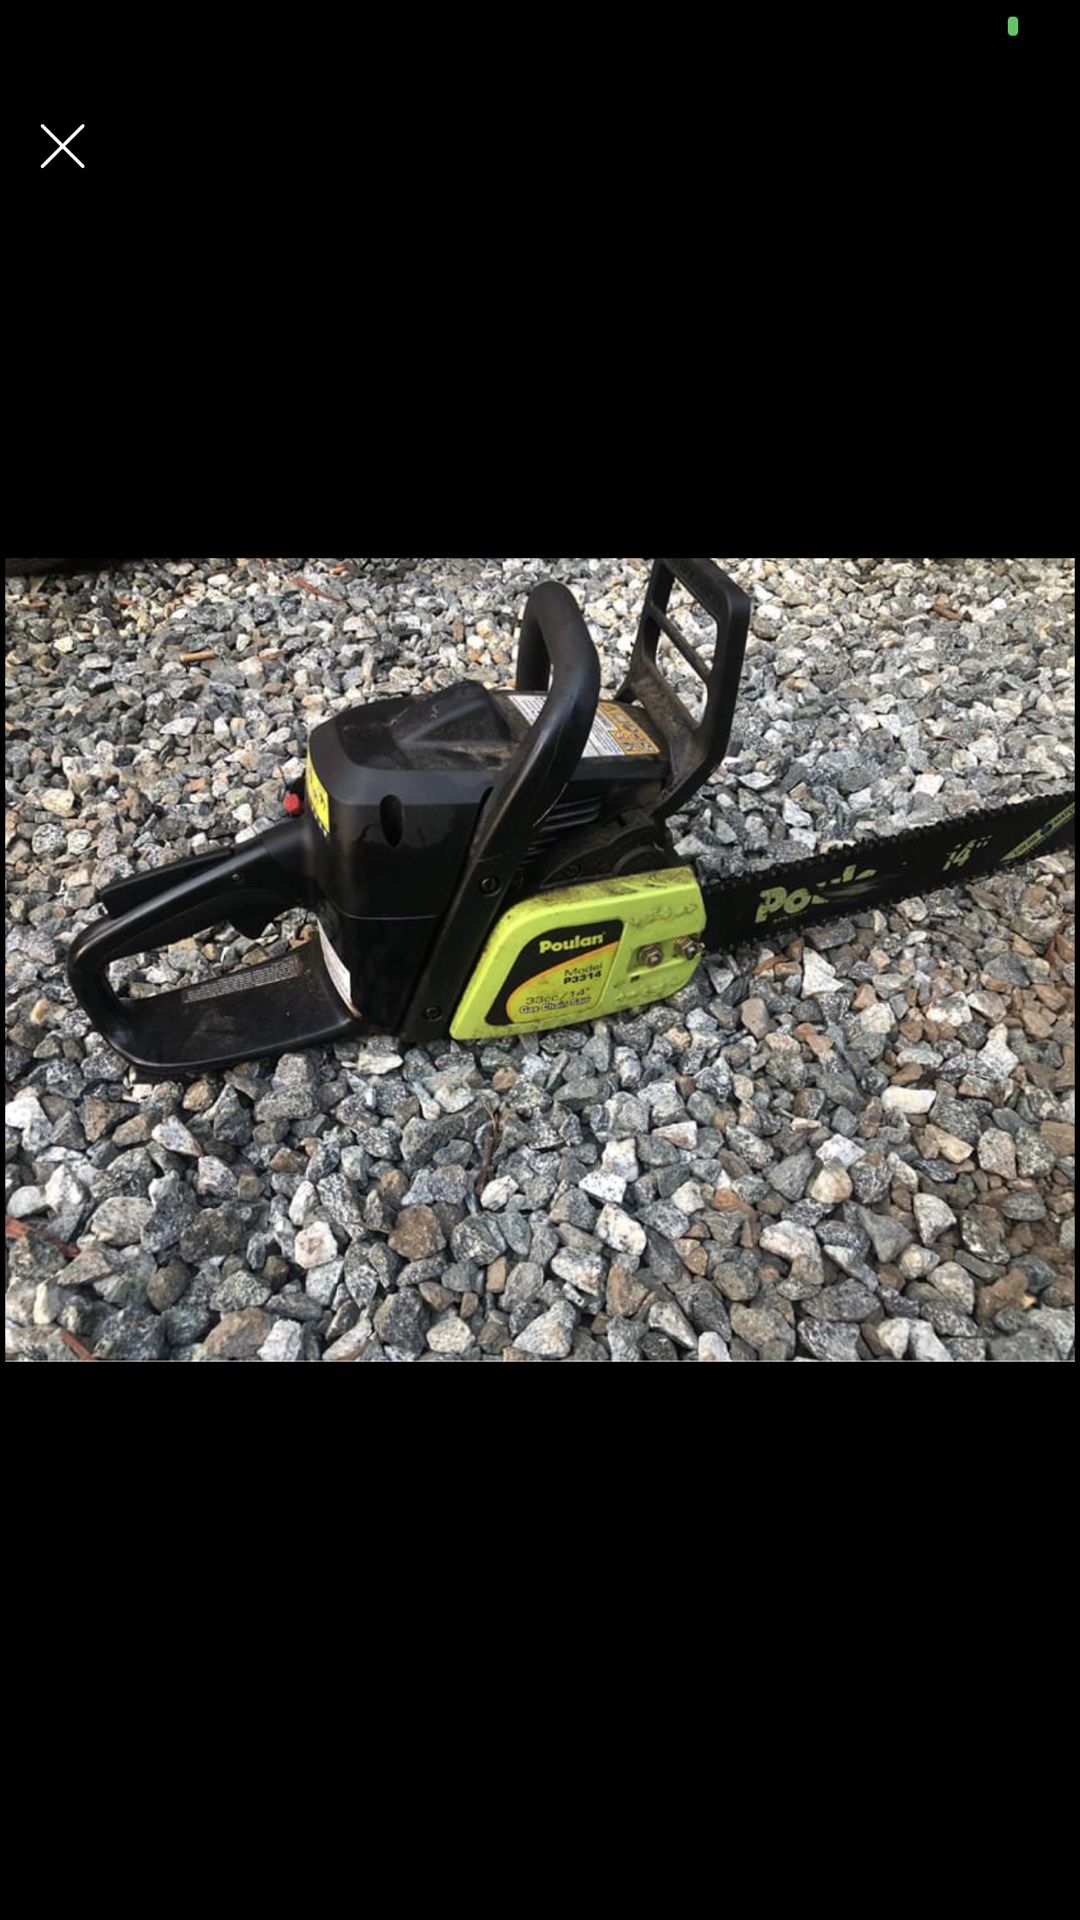 Poulan 14 inch chainsaw nearly new $85 firm